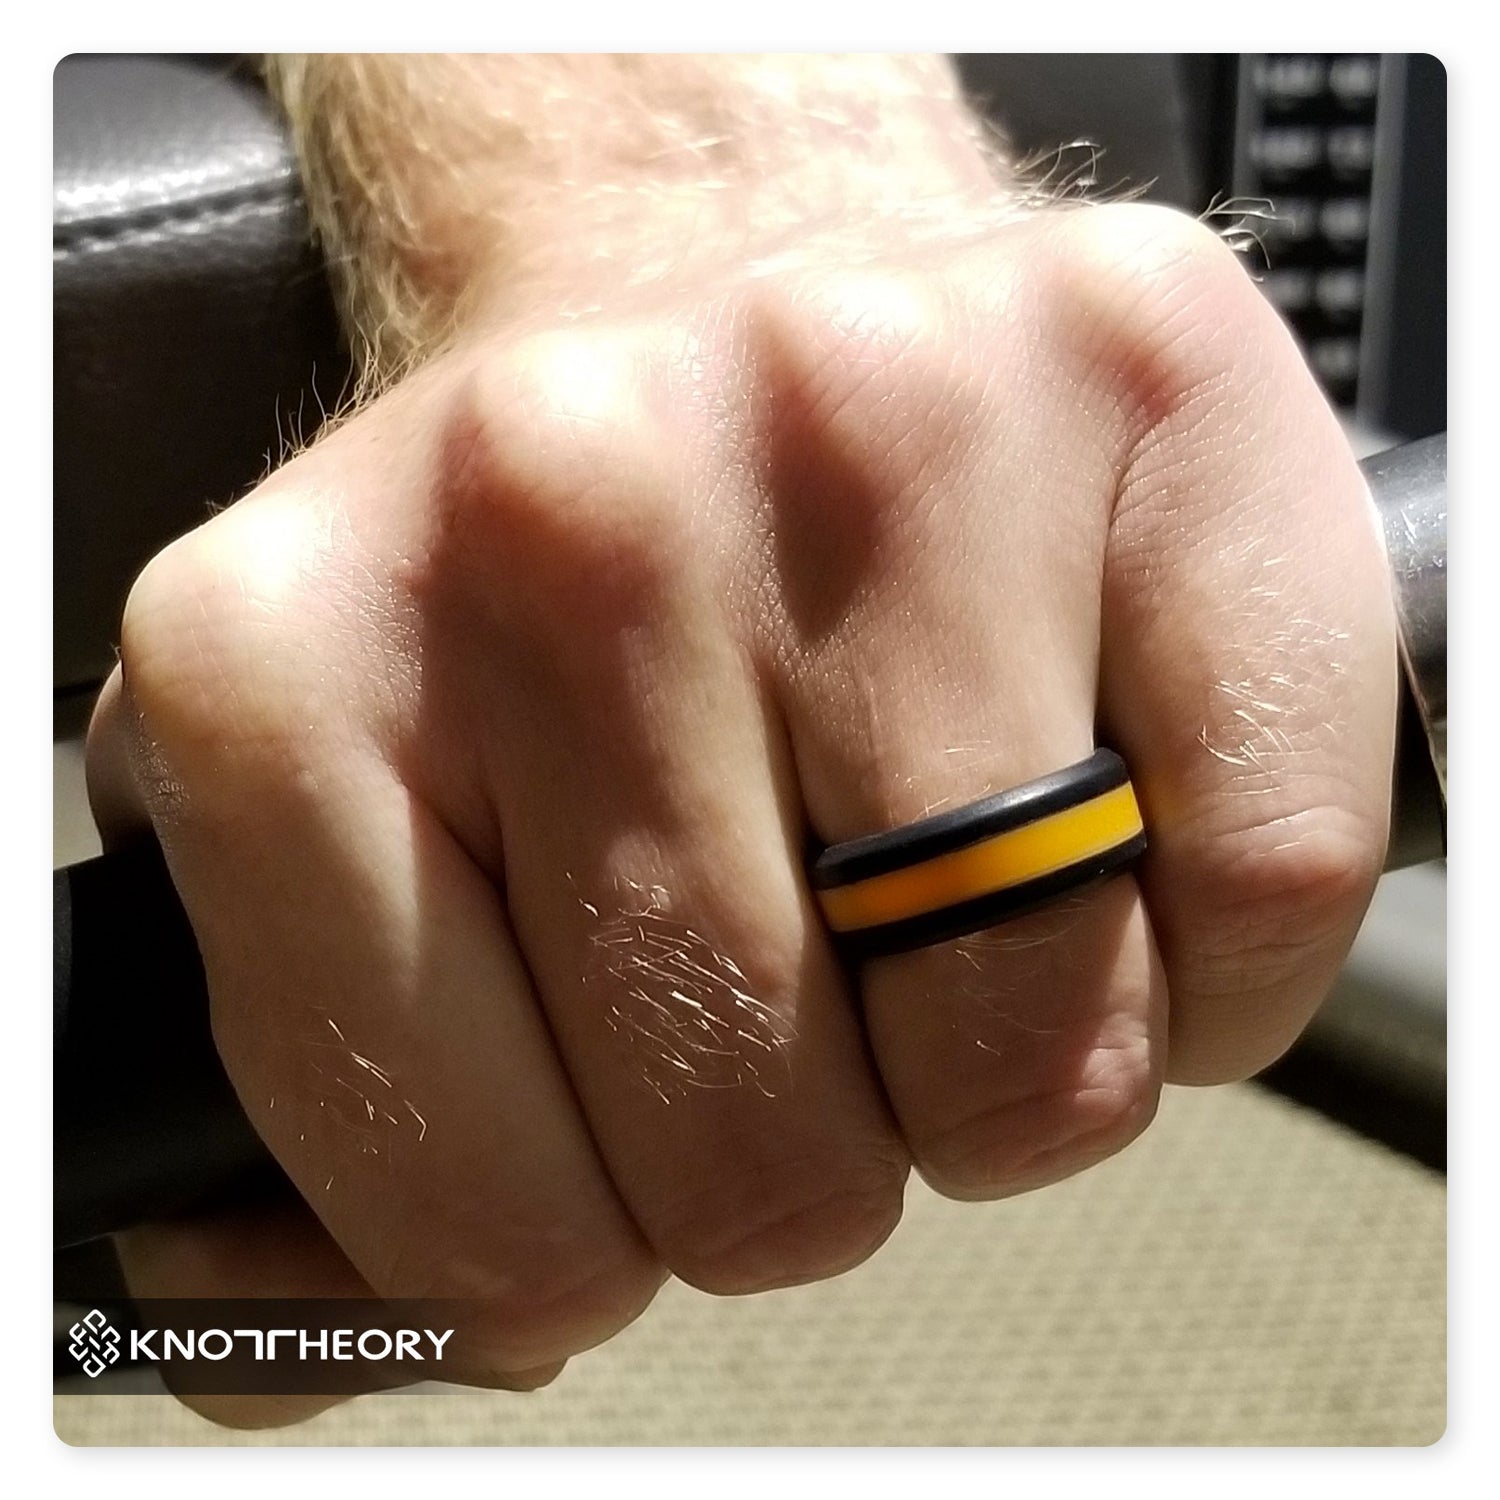 Orange Stripe Silicone Ring For Men and Women - Knot Theory